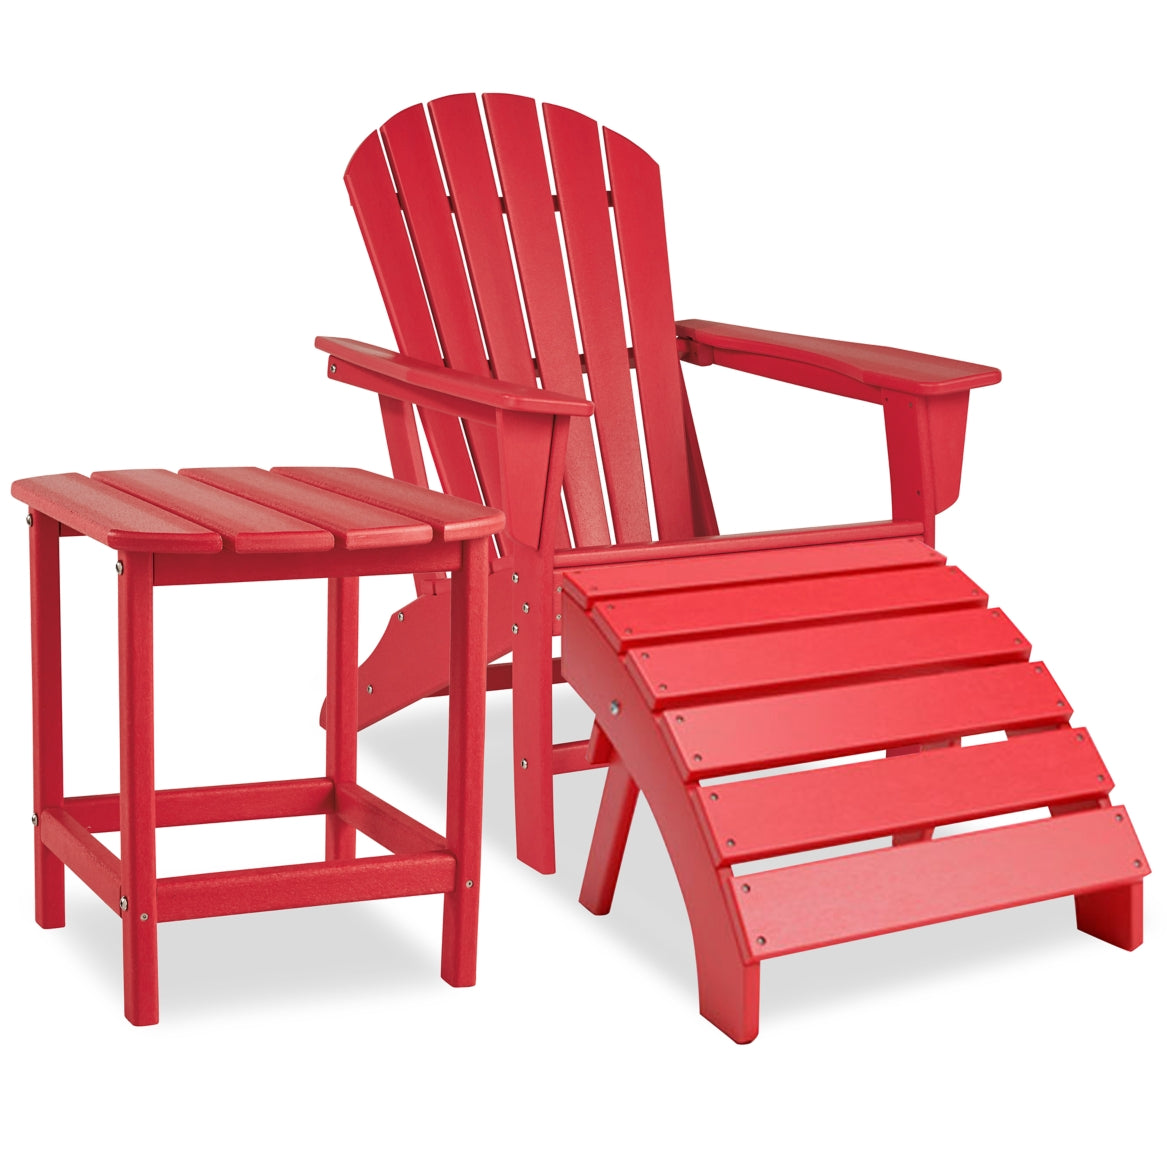 Sundown Treasure Outdoor Adirondack Chair and Ottoman with Side Table - furniture place usa